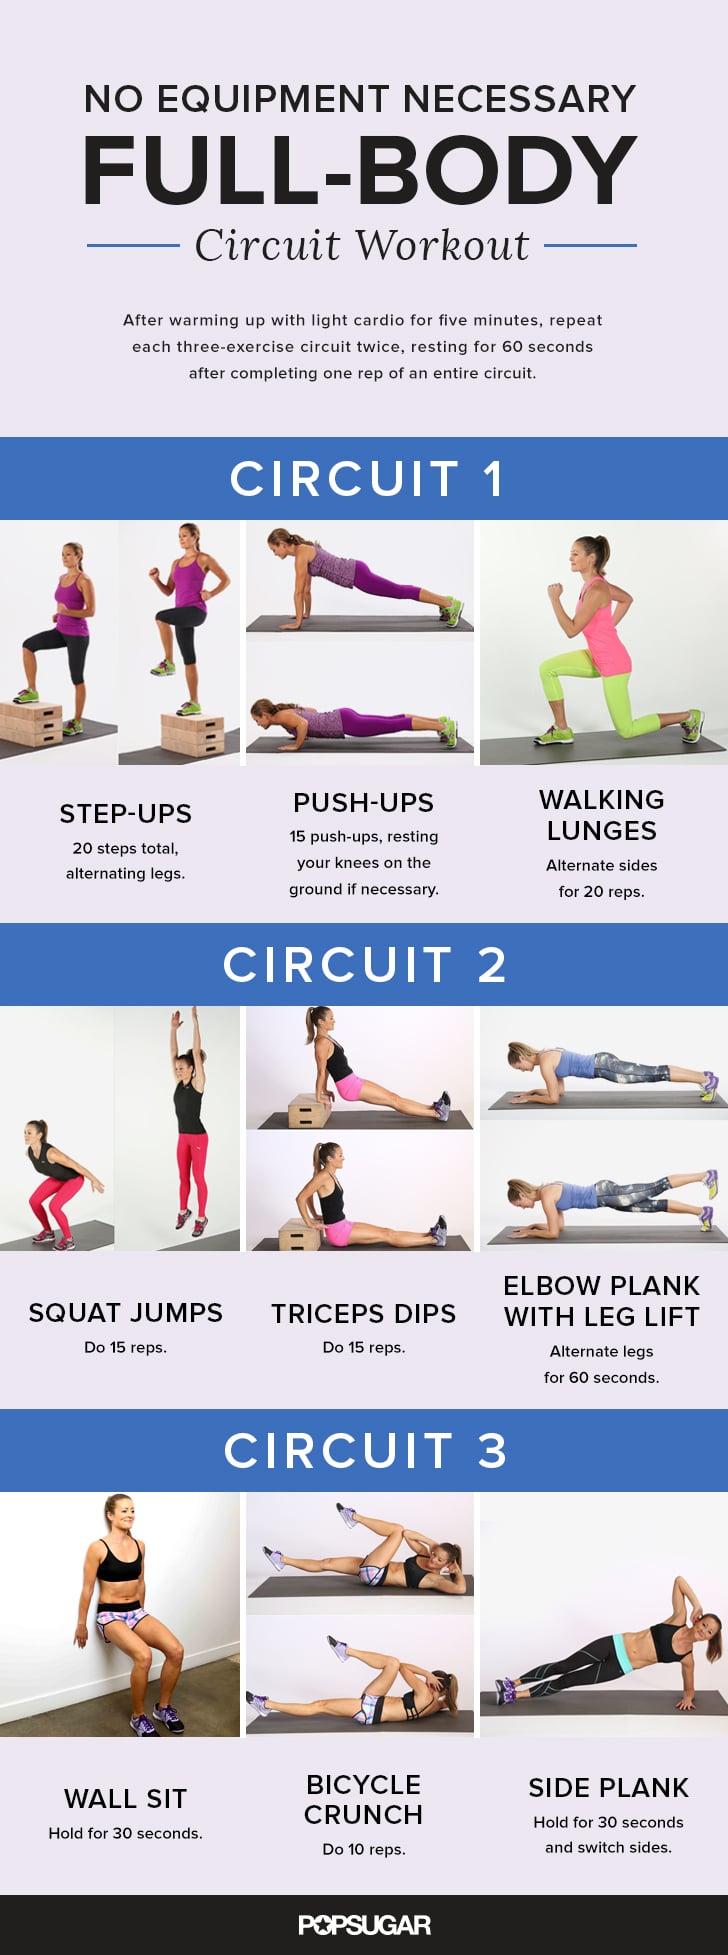 Essential exercises to include in any full body workout